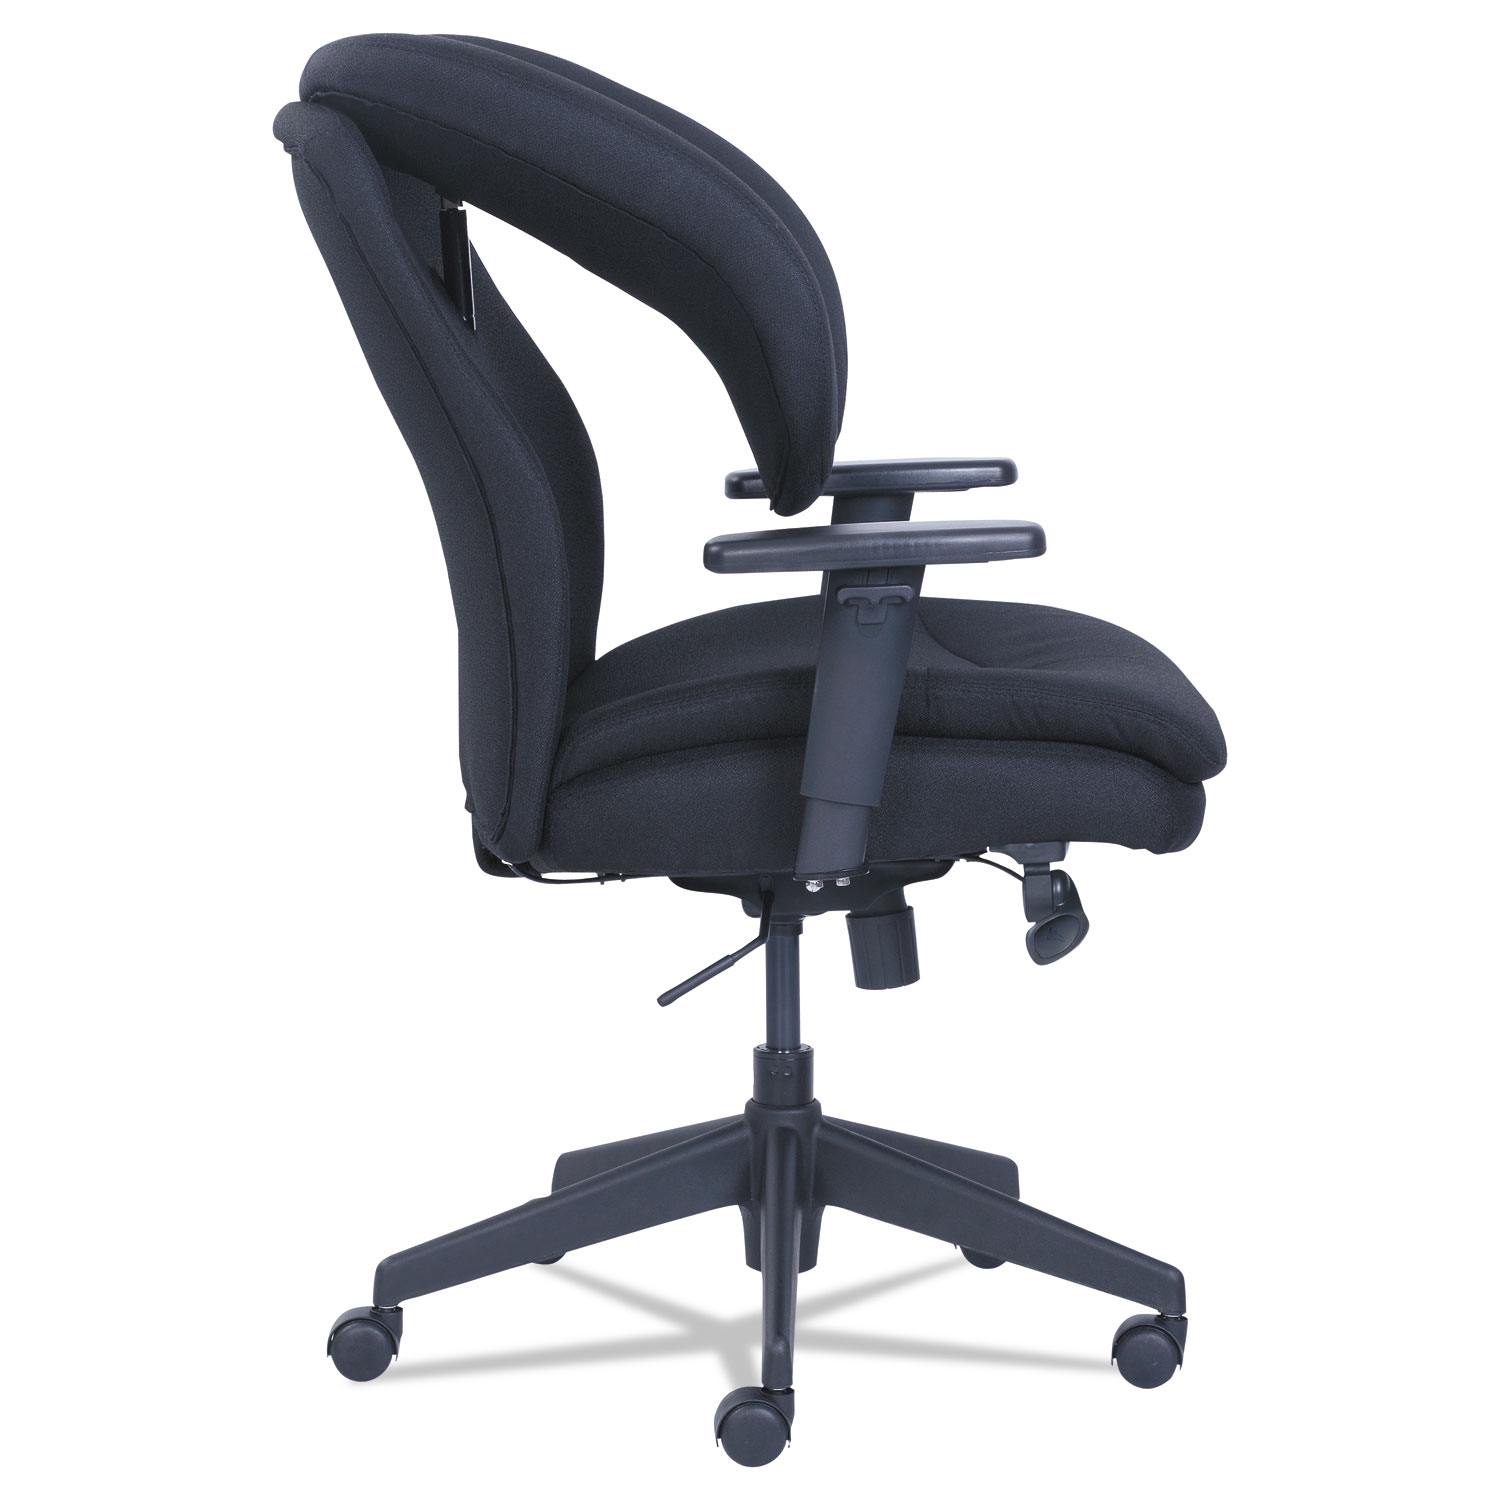 Cosset Ergonomic Task Chair, Supports up to 275 lbs., Black Seat/Black Back, Black Base